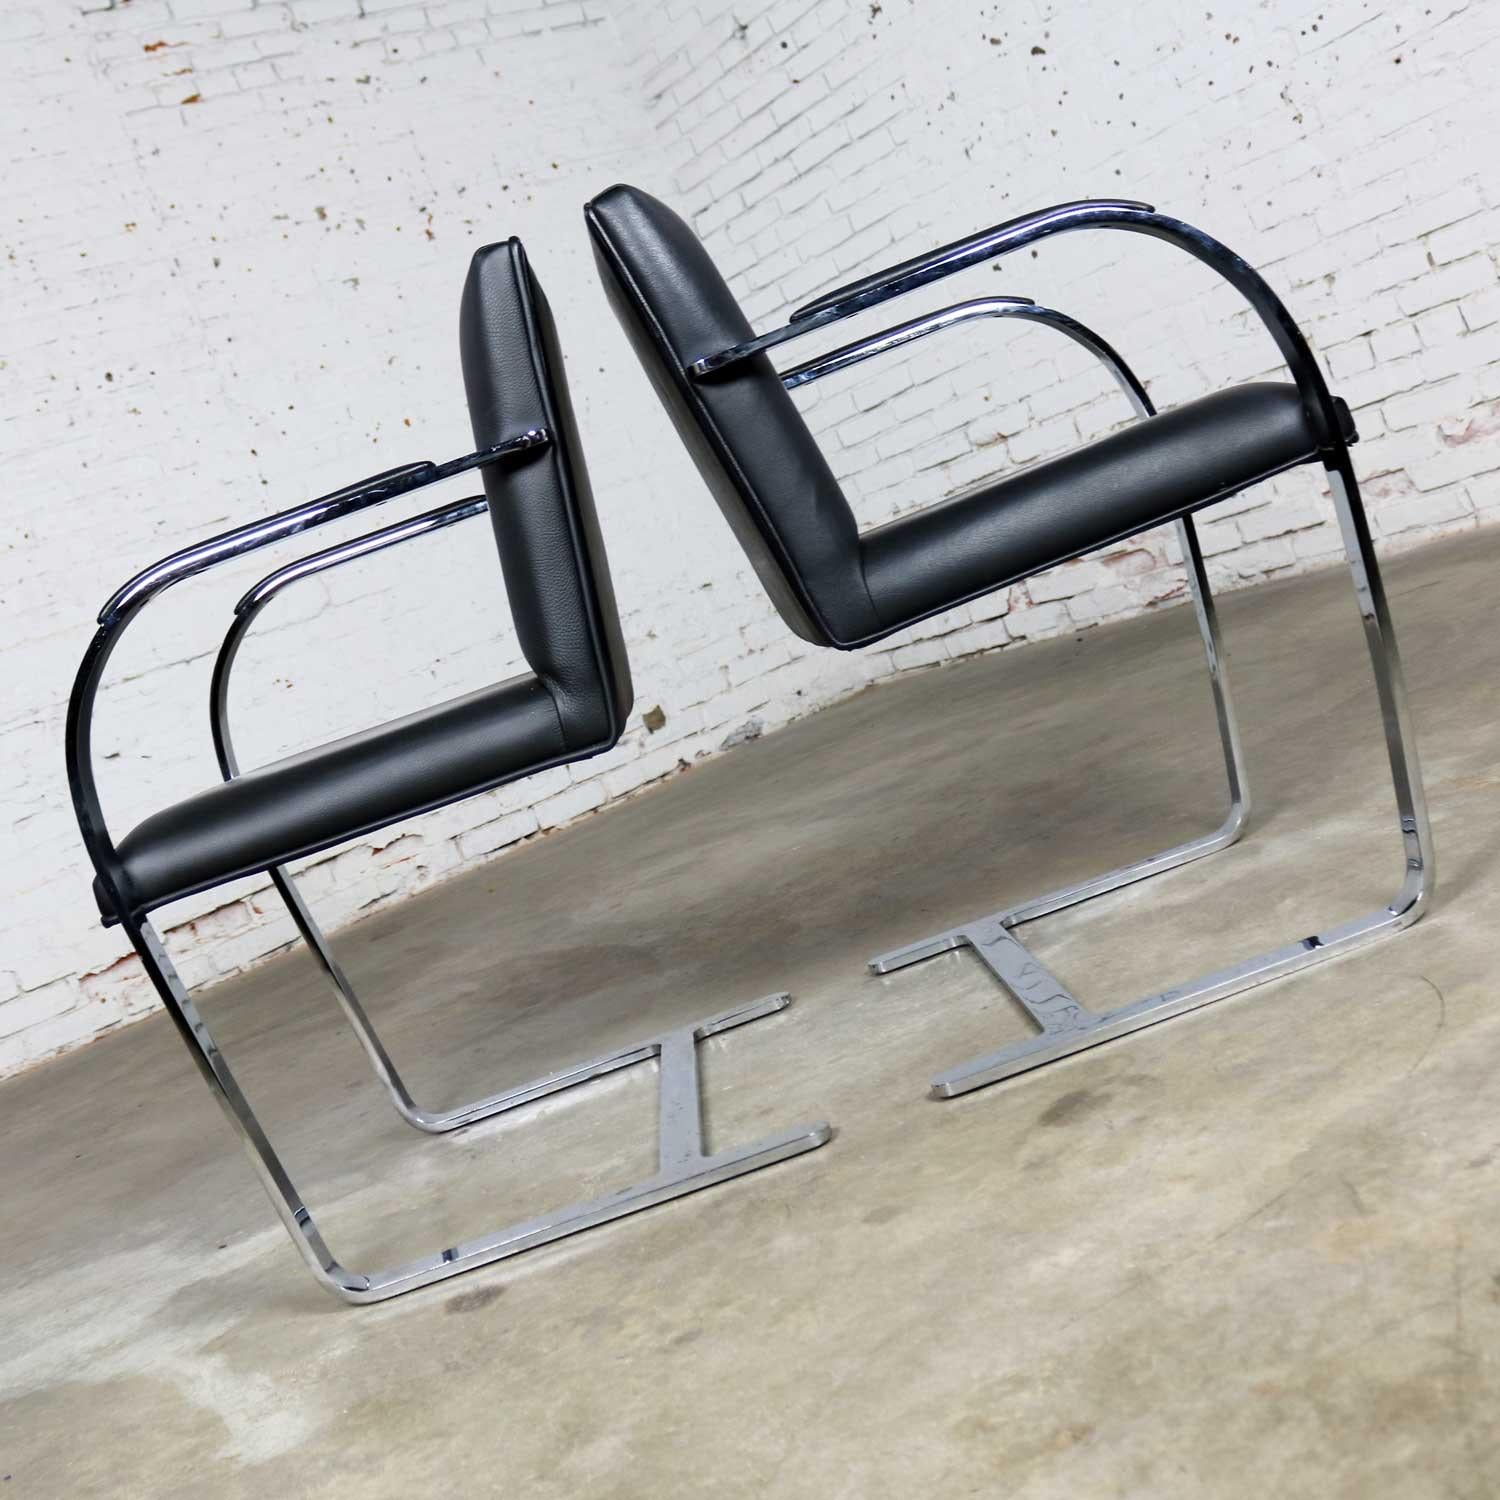 Bauhaus Black Leather Flat Bar Brno Chairs by Mies Van Der Rohe & Lilly Reich by Gordon